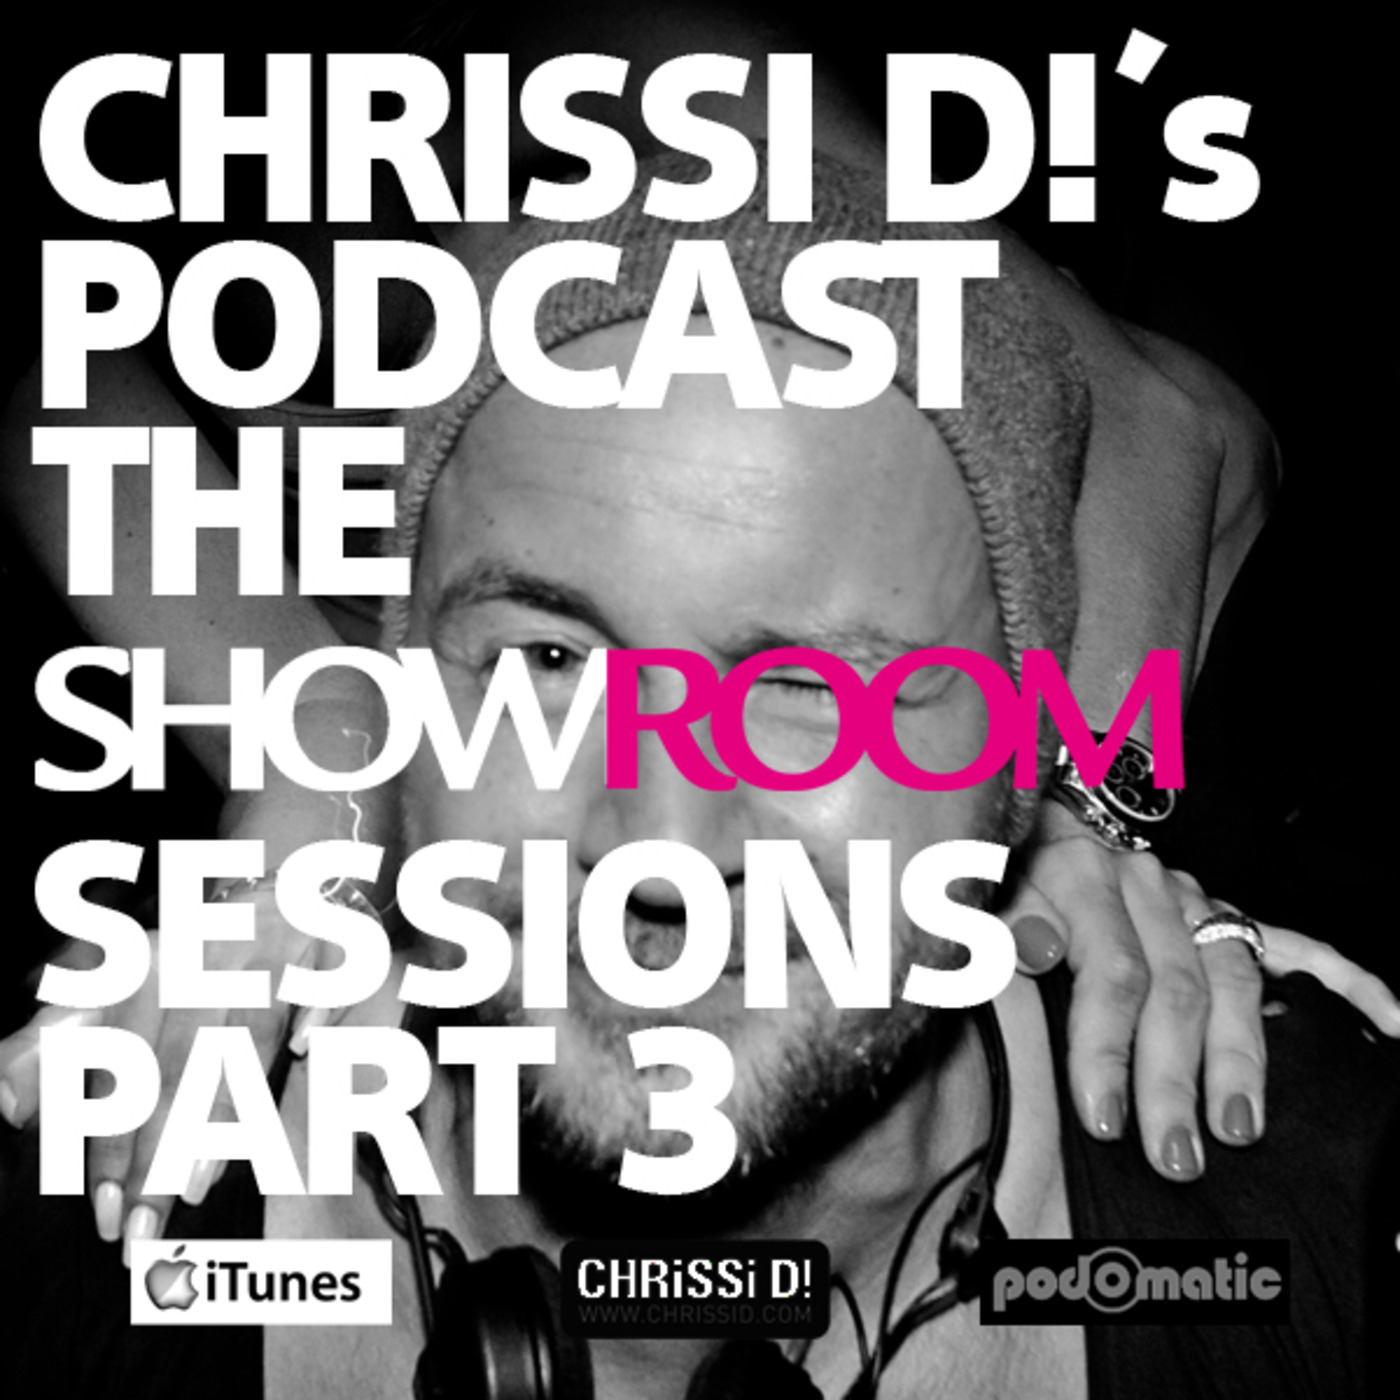 CHRISSI D! pres.: THE SHOWROOM SESSIONS PART 3